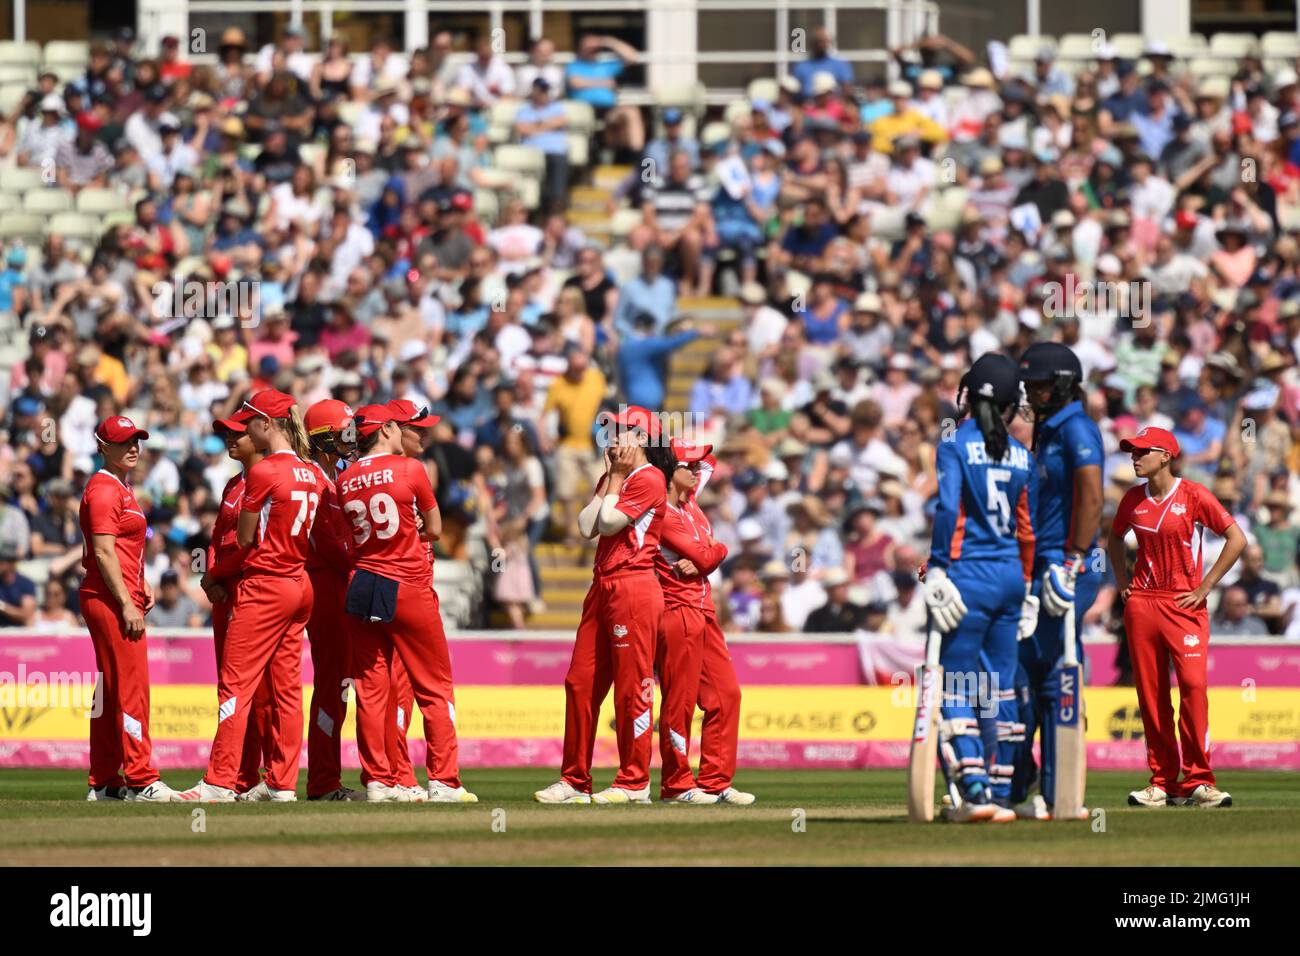 BIRMINGHAM, UK. AUG 6TH England watch pensively as a wicket is overturned during the T20 Cricket semi-final between England and India at Edgbaston during the Birmingham 2022 Commonwealth Games on Saturday 6th August 2022. (Credit: Pat Scaasi | MI News) Credit: MI News & Sport /Alamy Live News Stock Photo